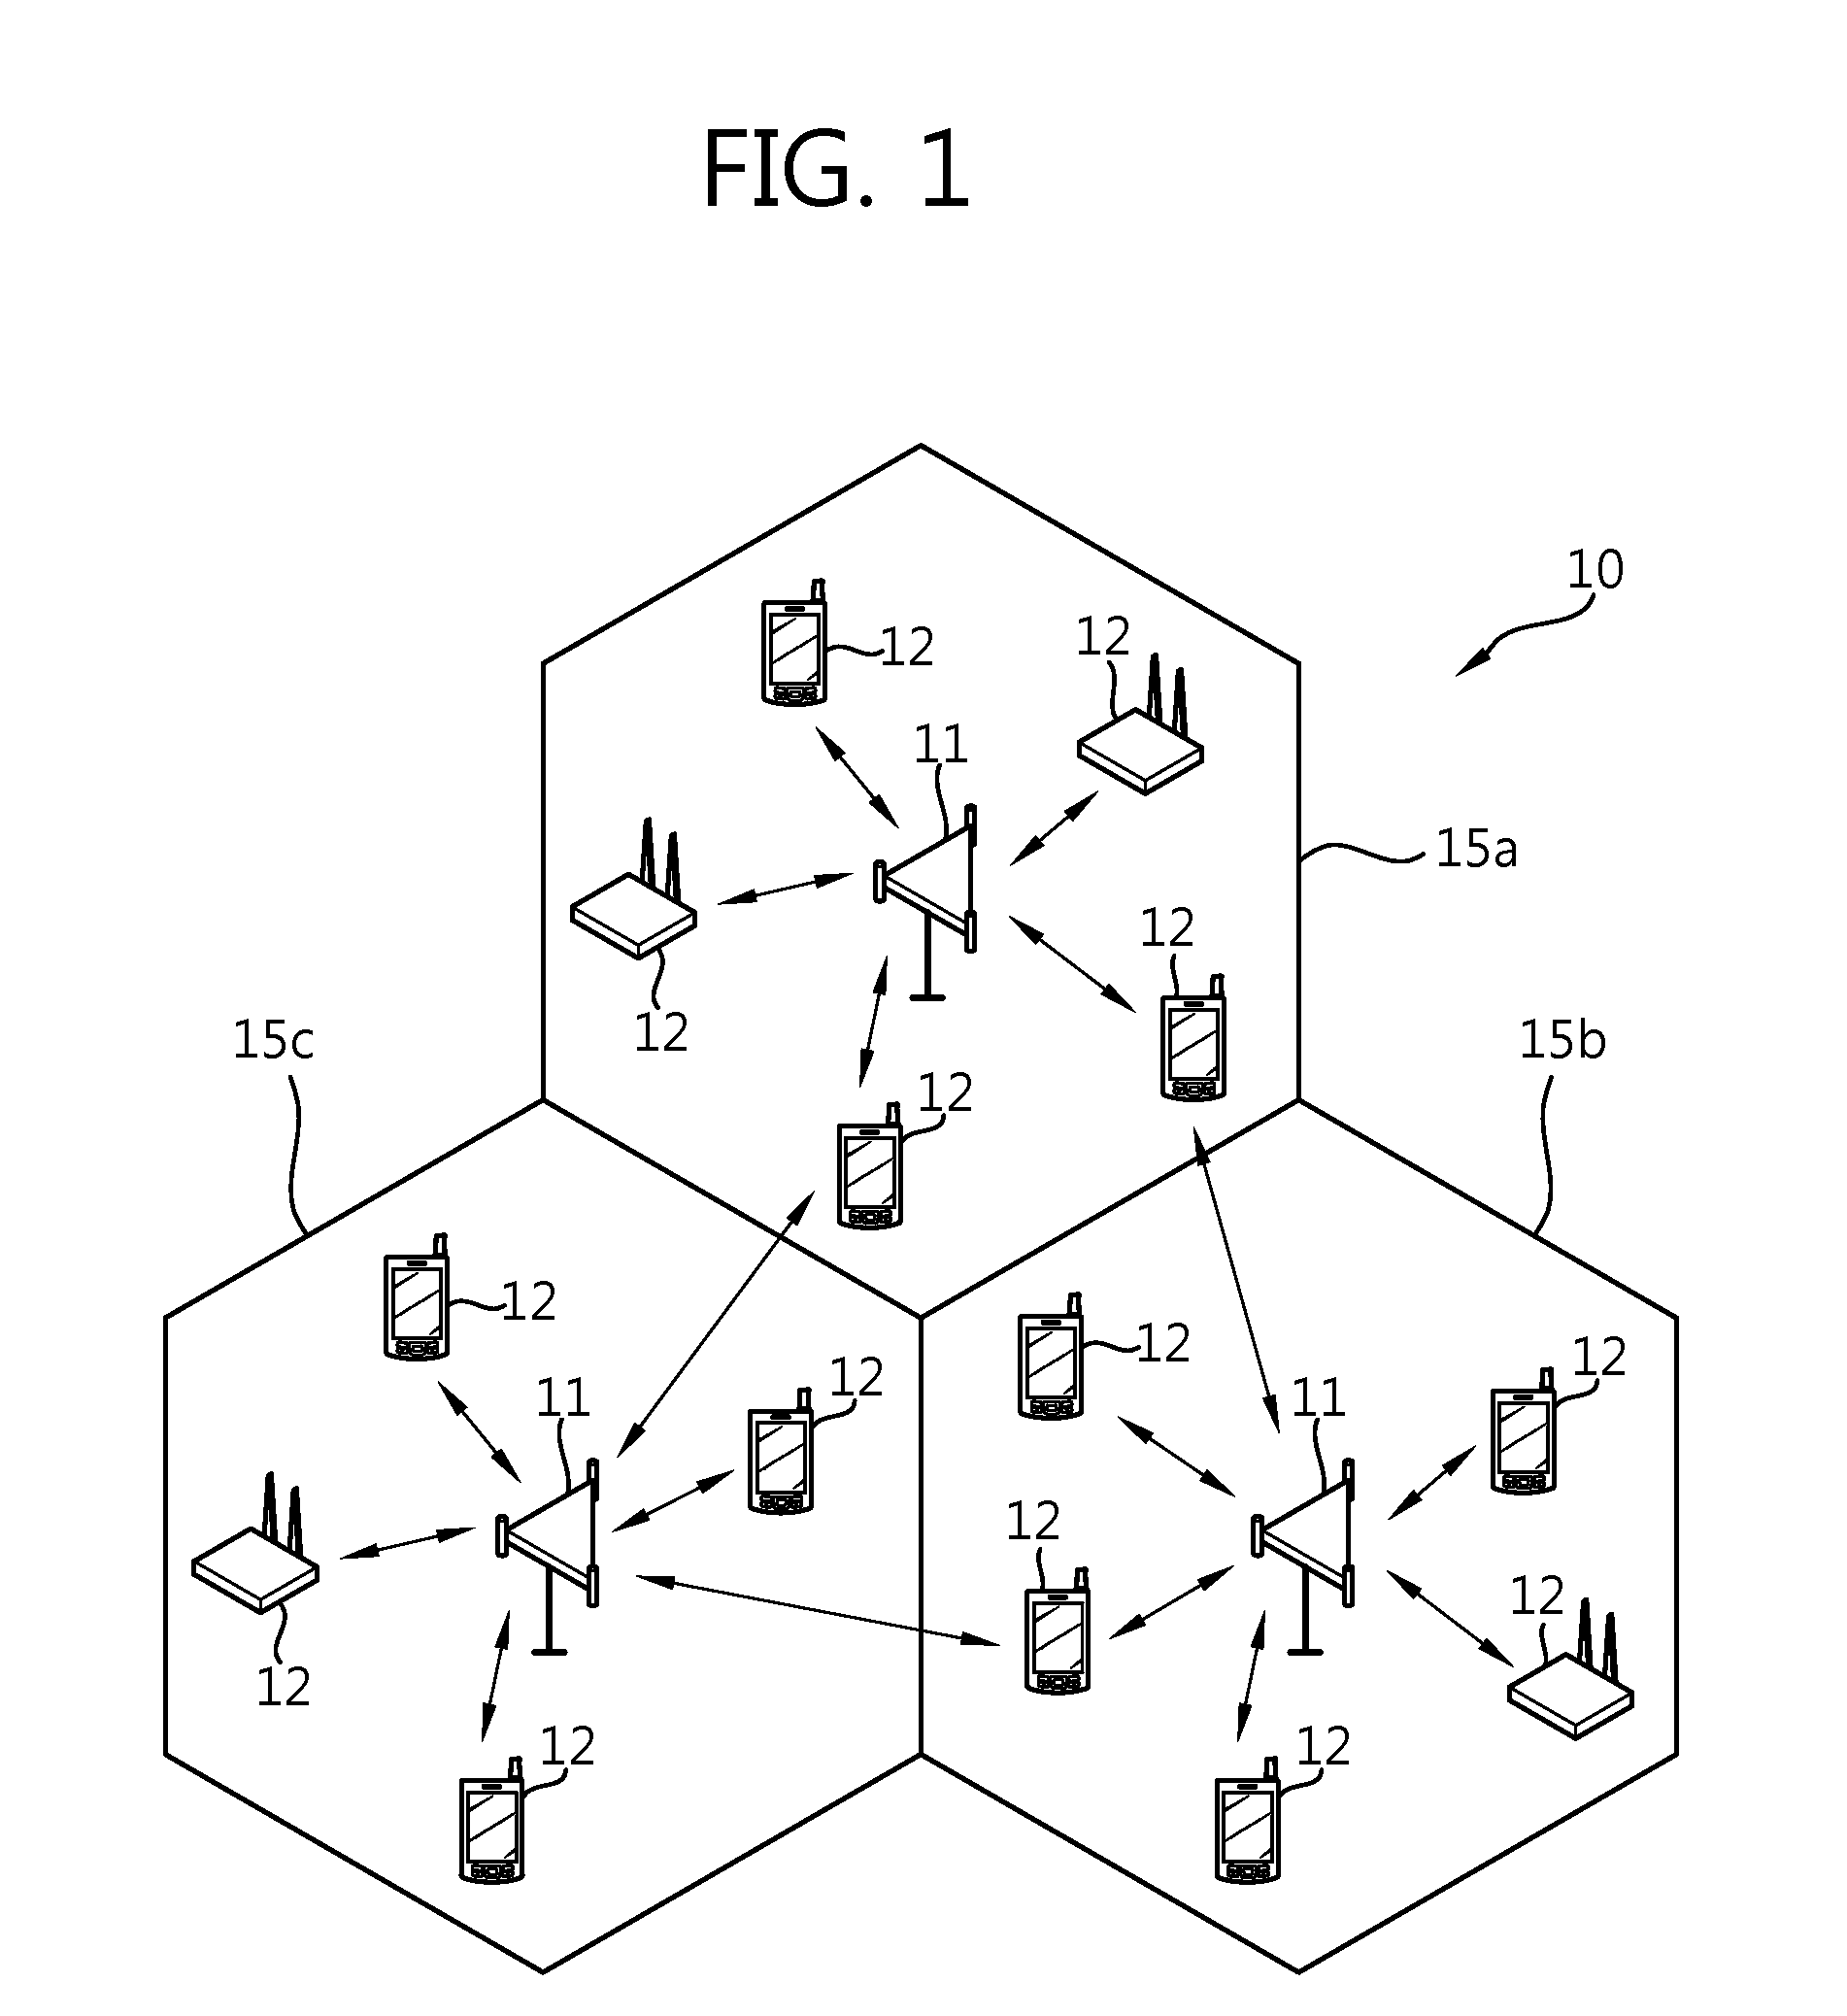 Method of transmitting semi-persistent scheduling data in multiple component carrier system